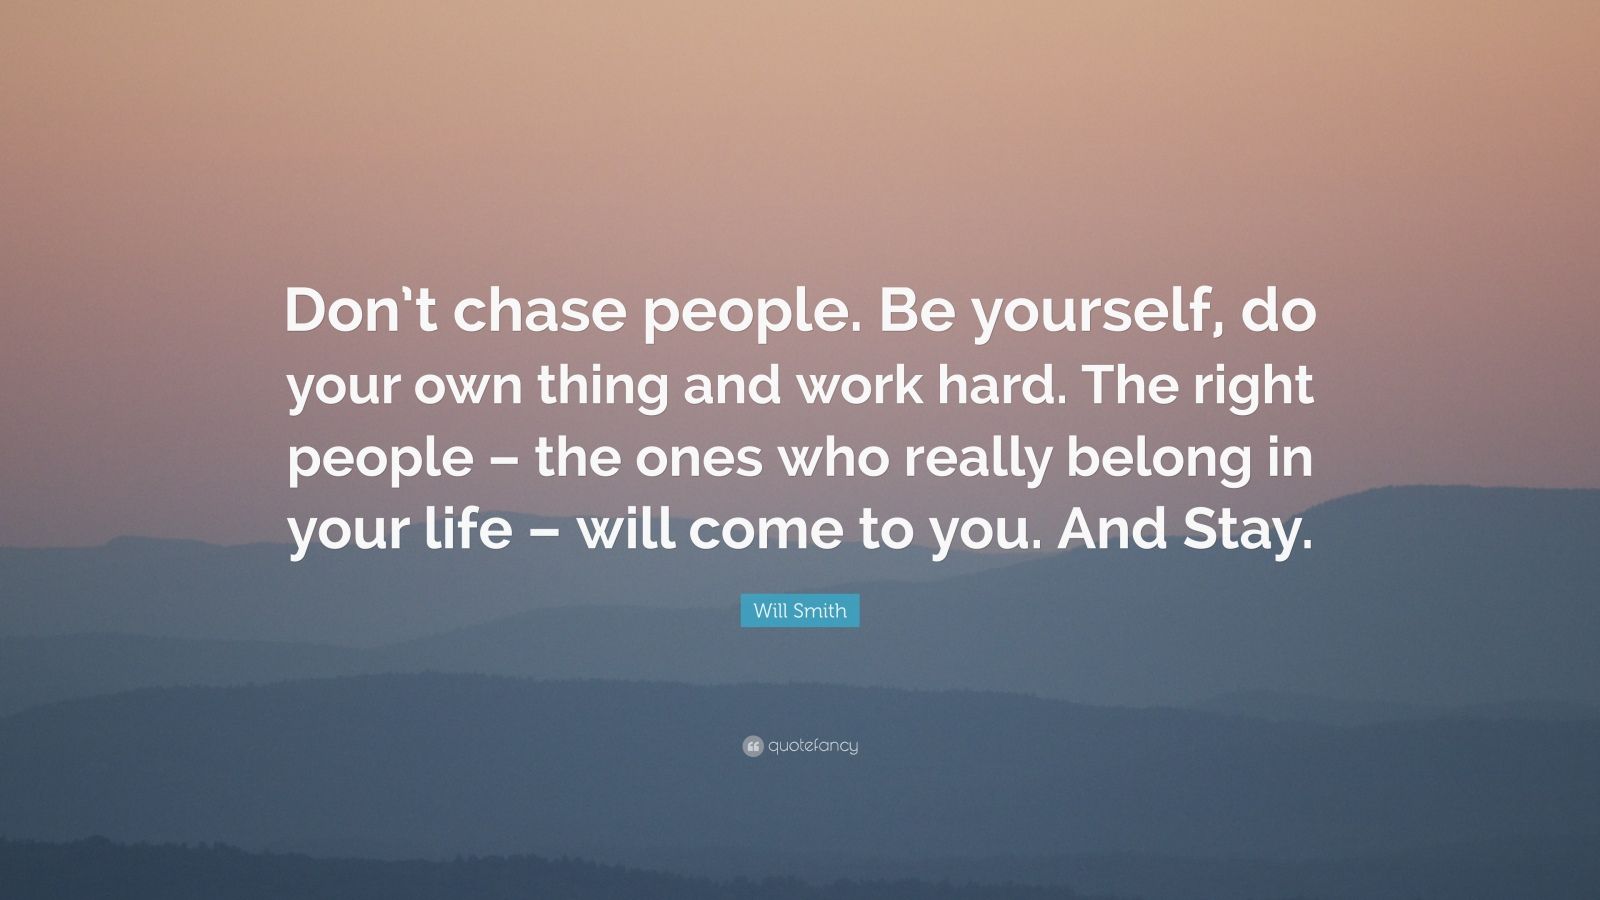 Will Smith Quote: “Don’t chase people. Be yourself, do your own thing